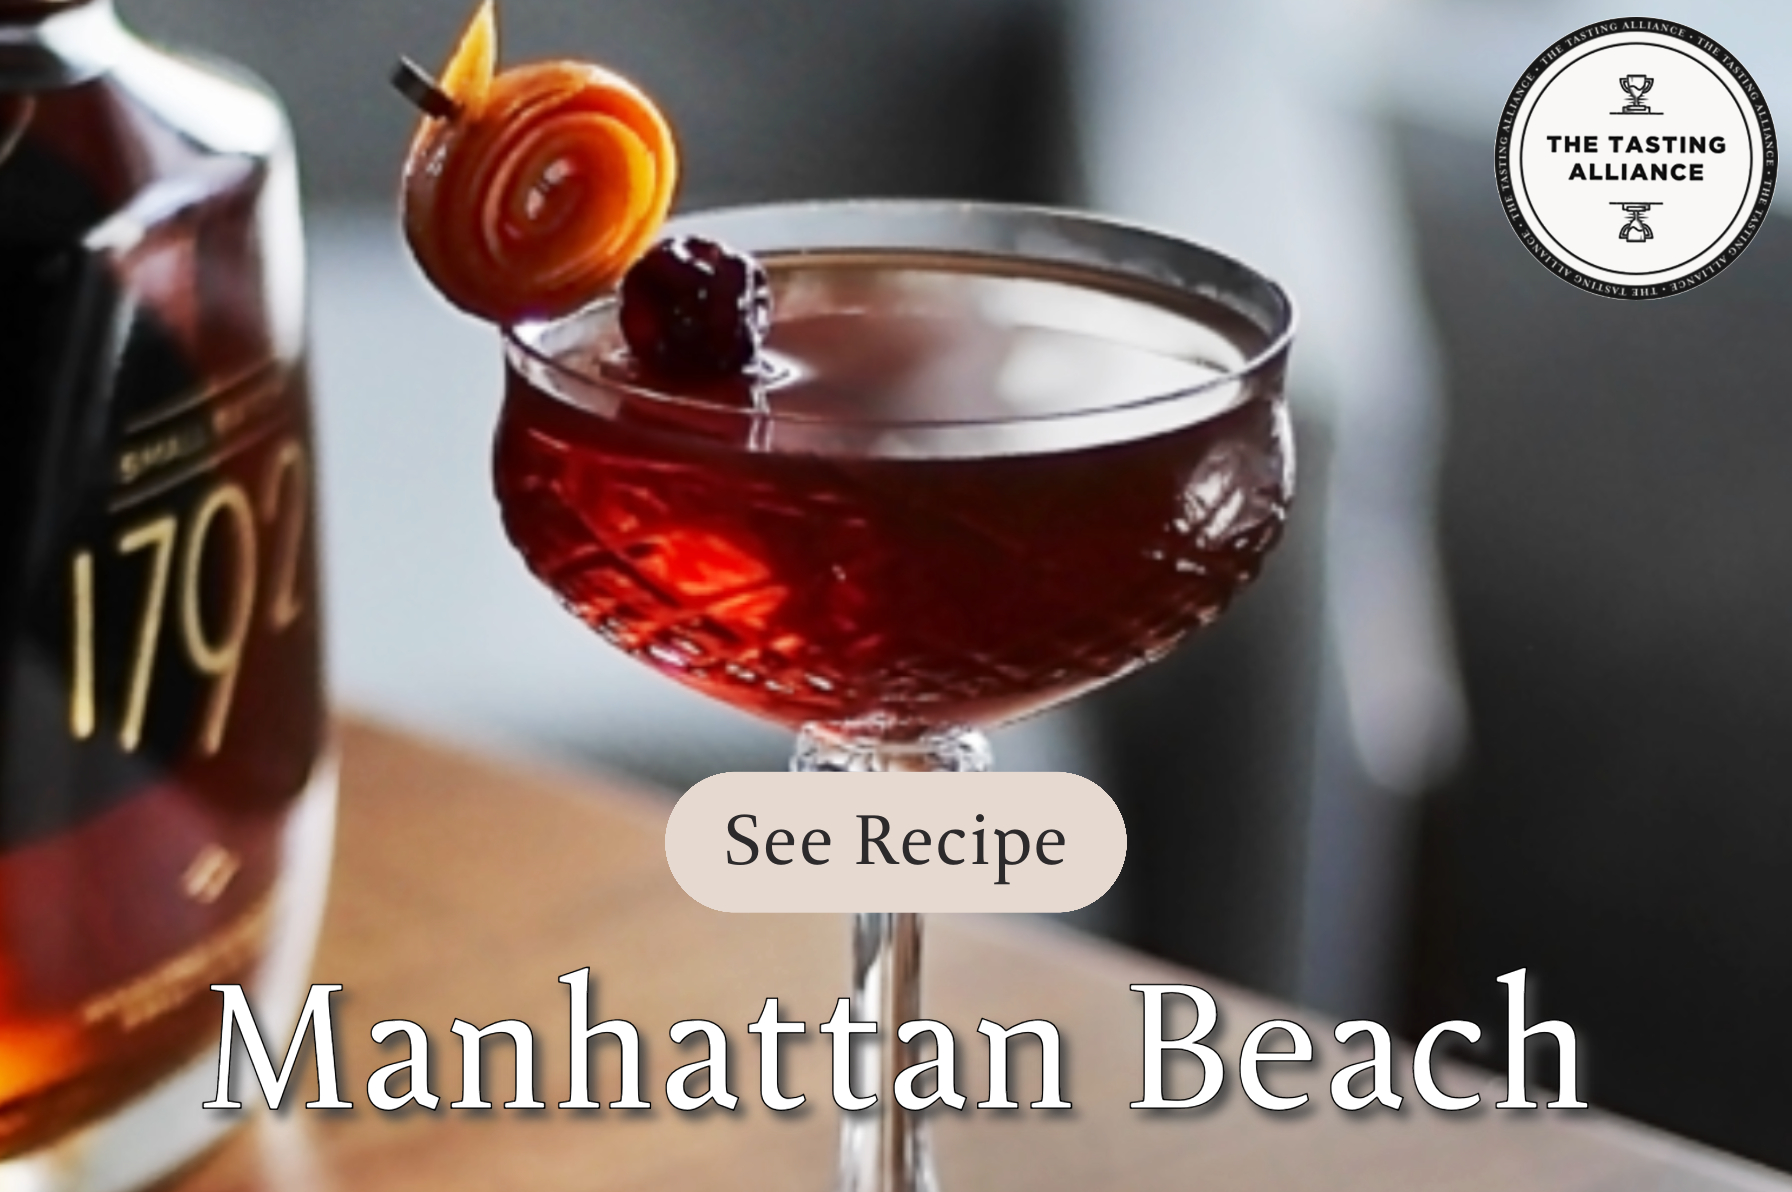 The recipe for The Tasting Alliance's Manhattan Beach Cocktail